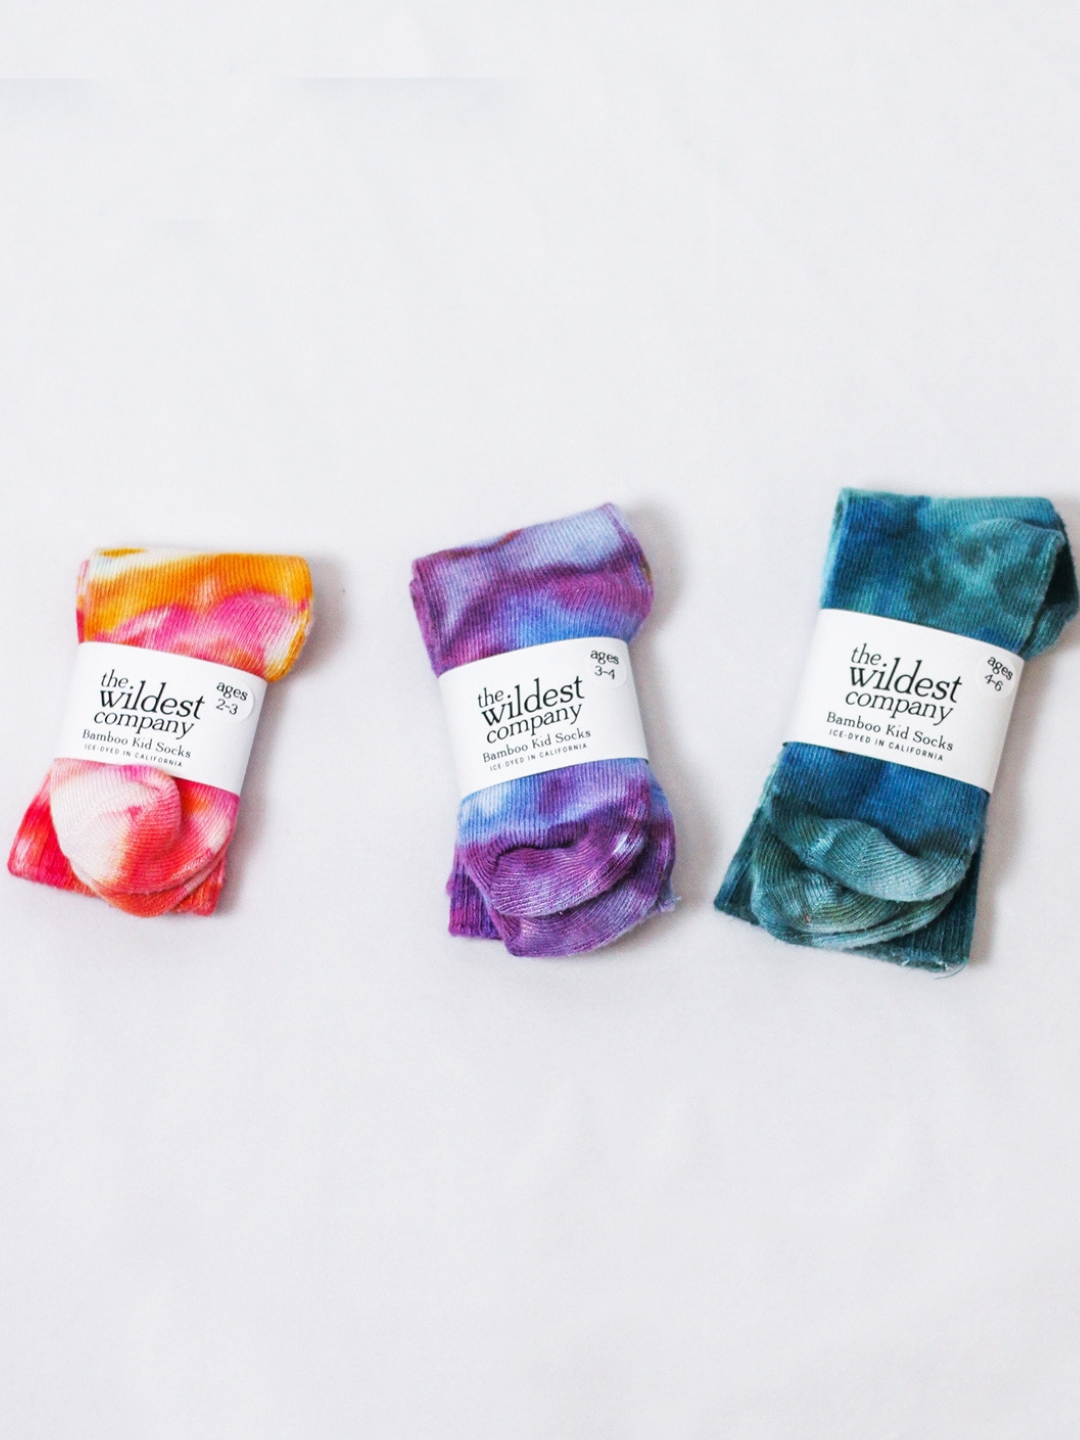 Ultraviolet | Three pairs of socks laid flat highlighting the Wildest Company paper packaging